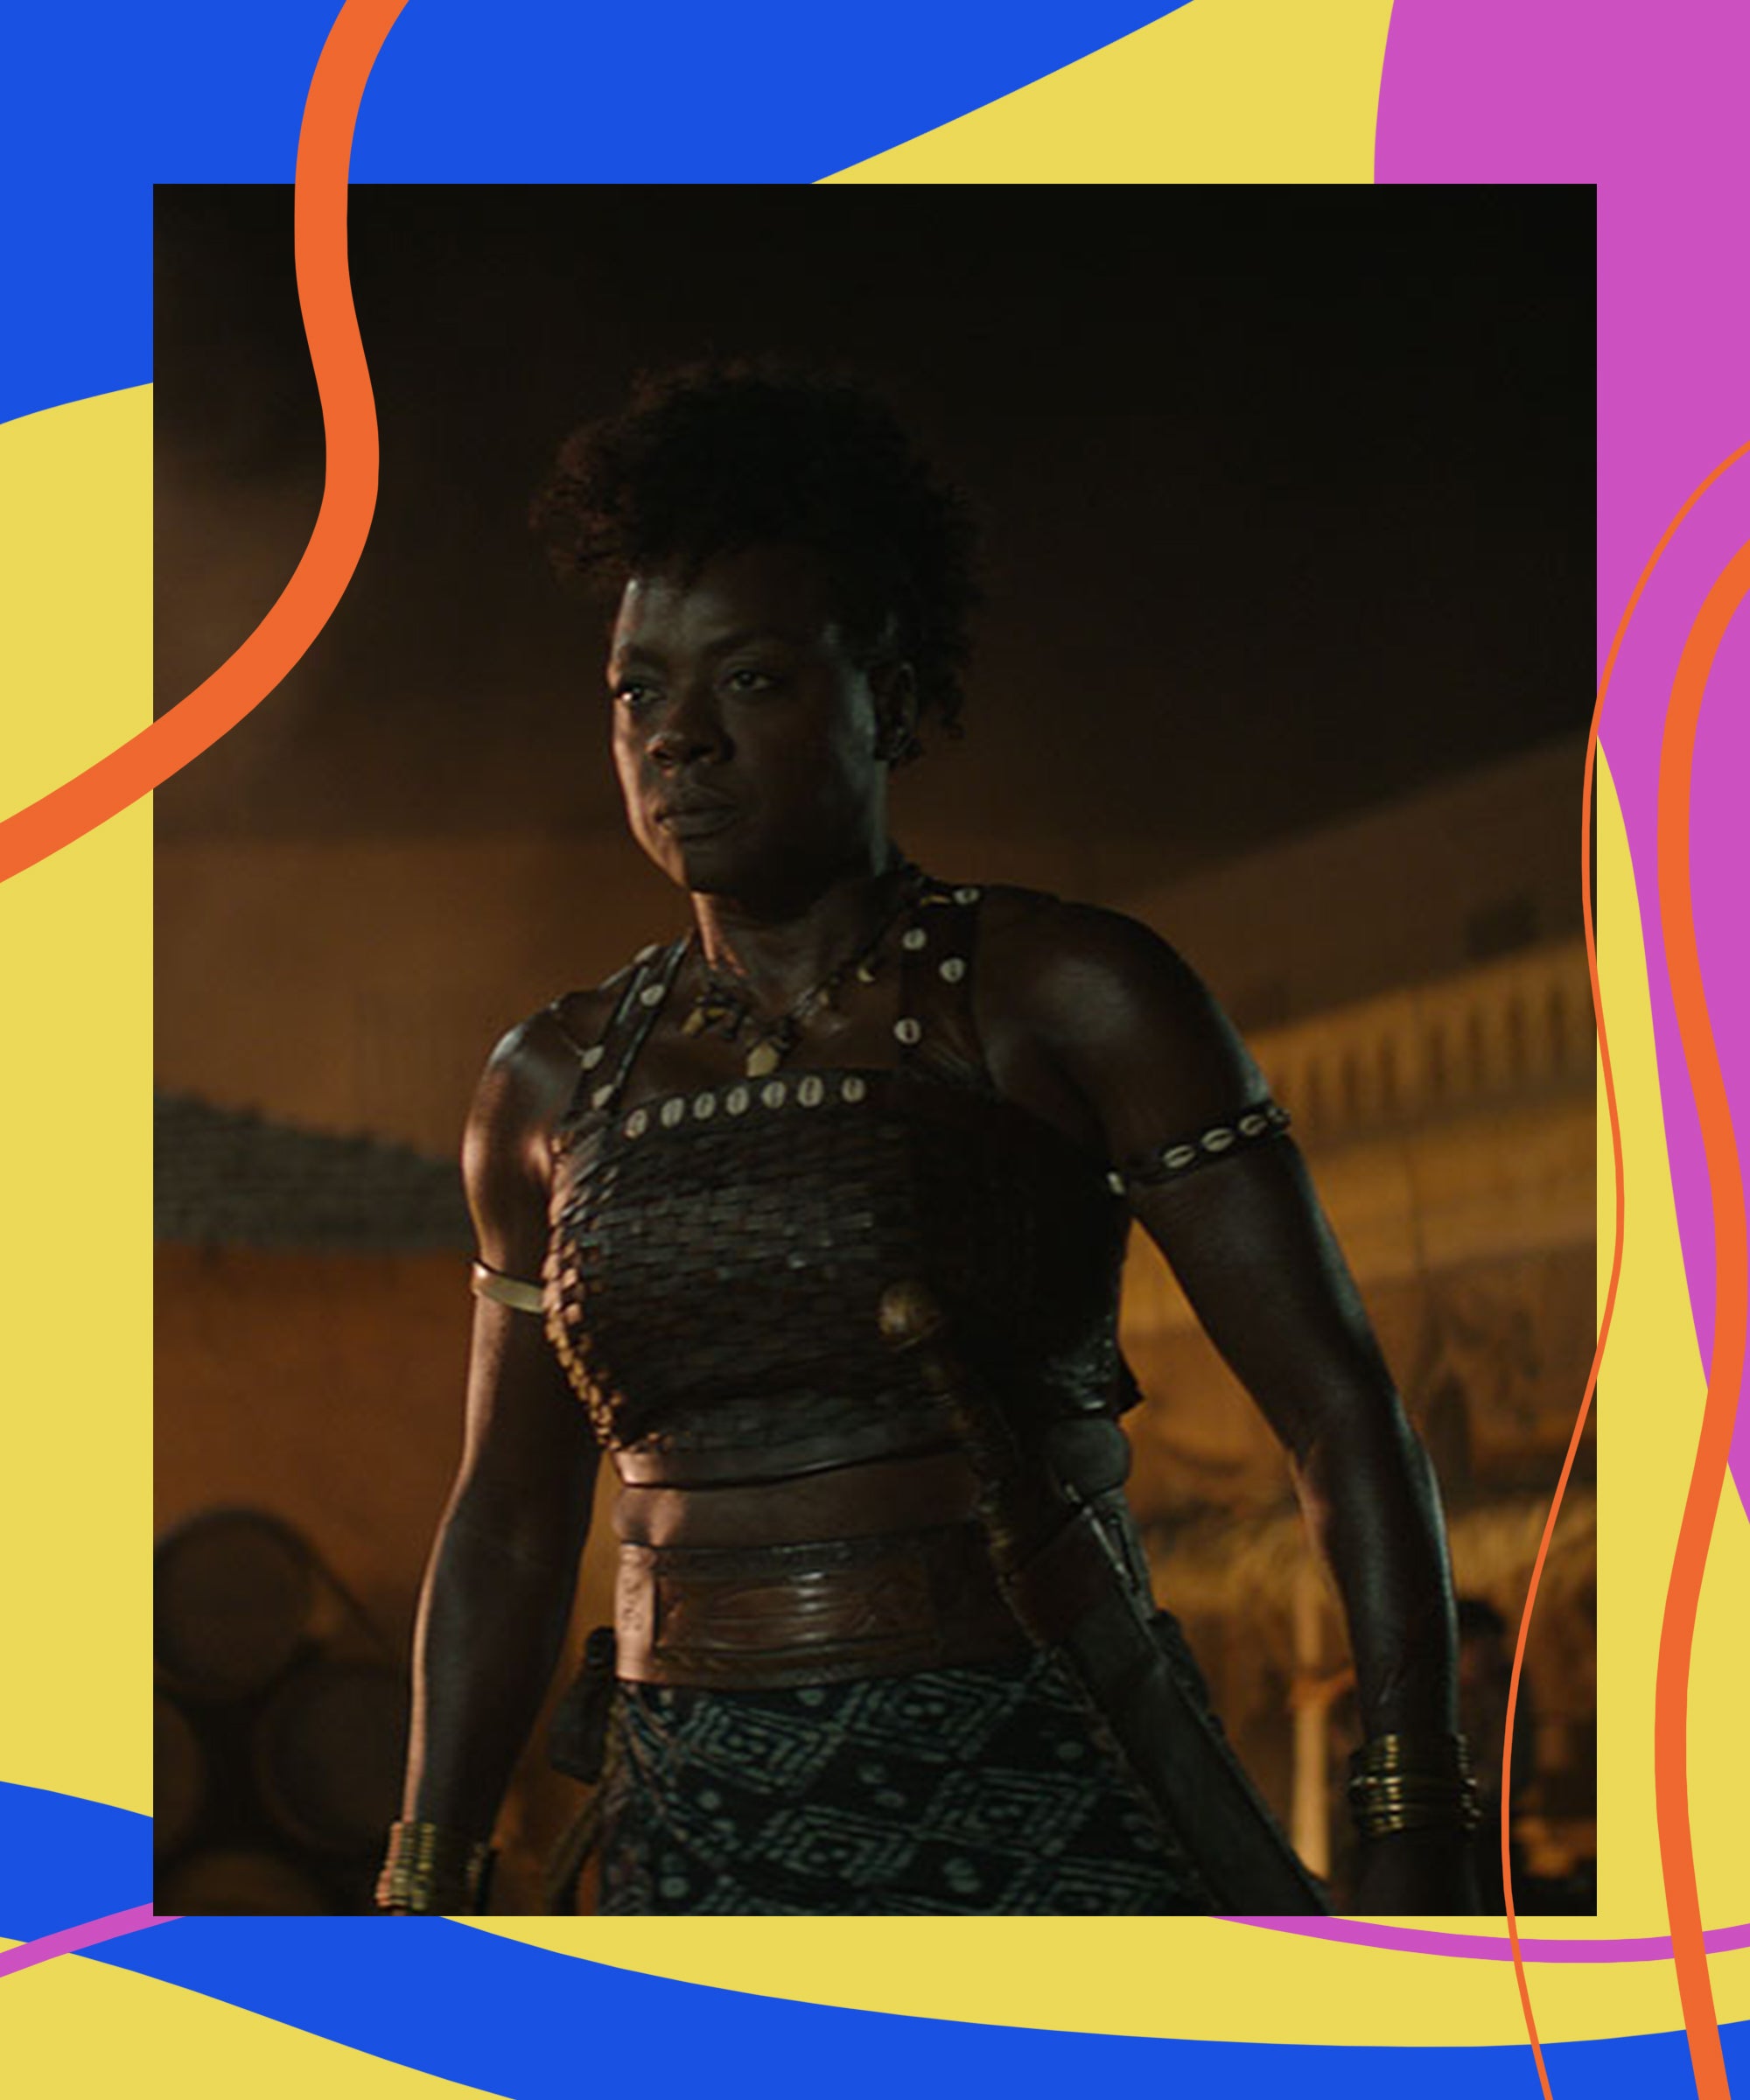 Behold 'The Woman King': Viola Davis as a Real-Life Warrior General